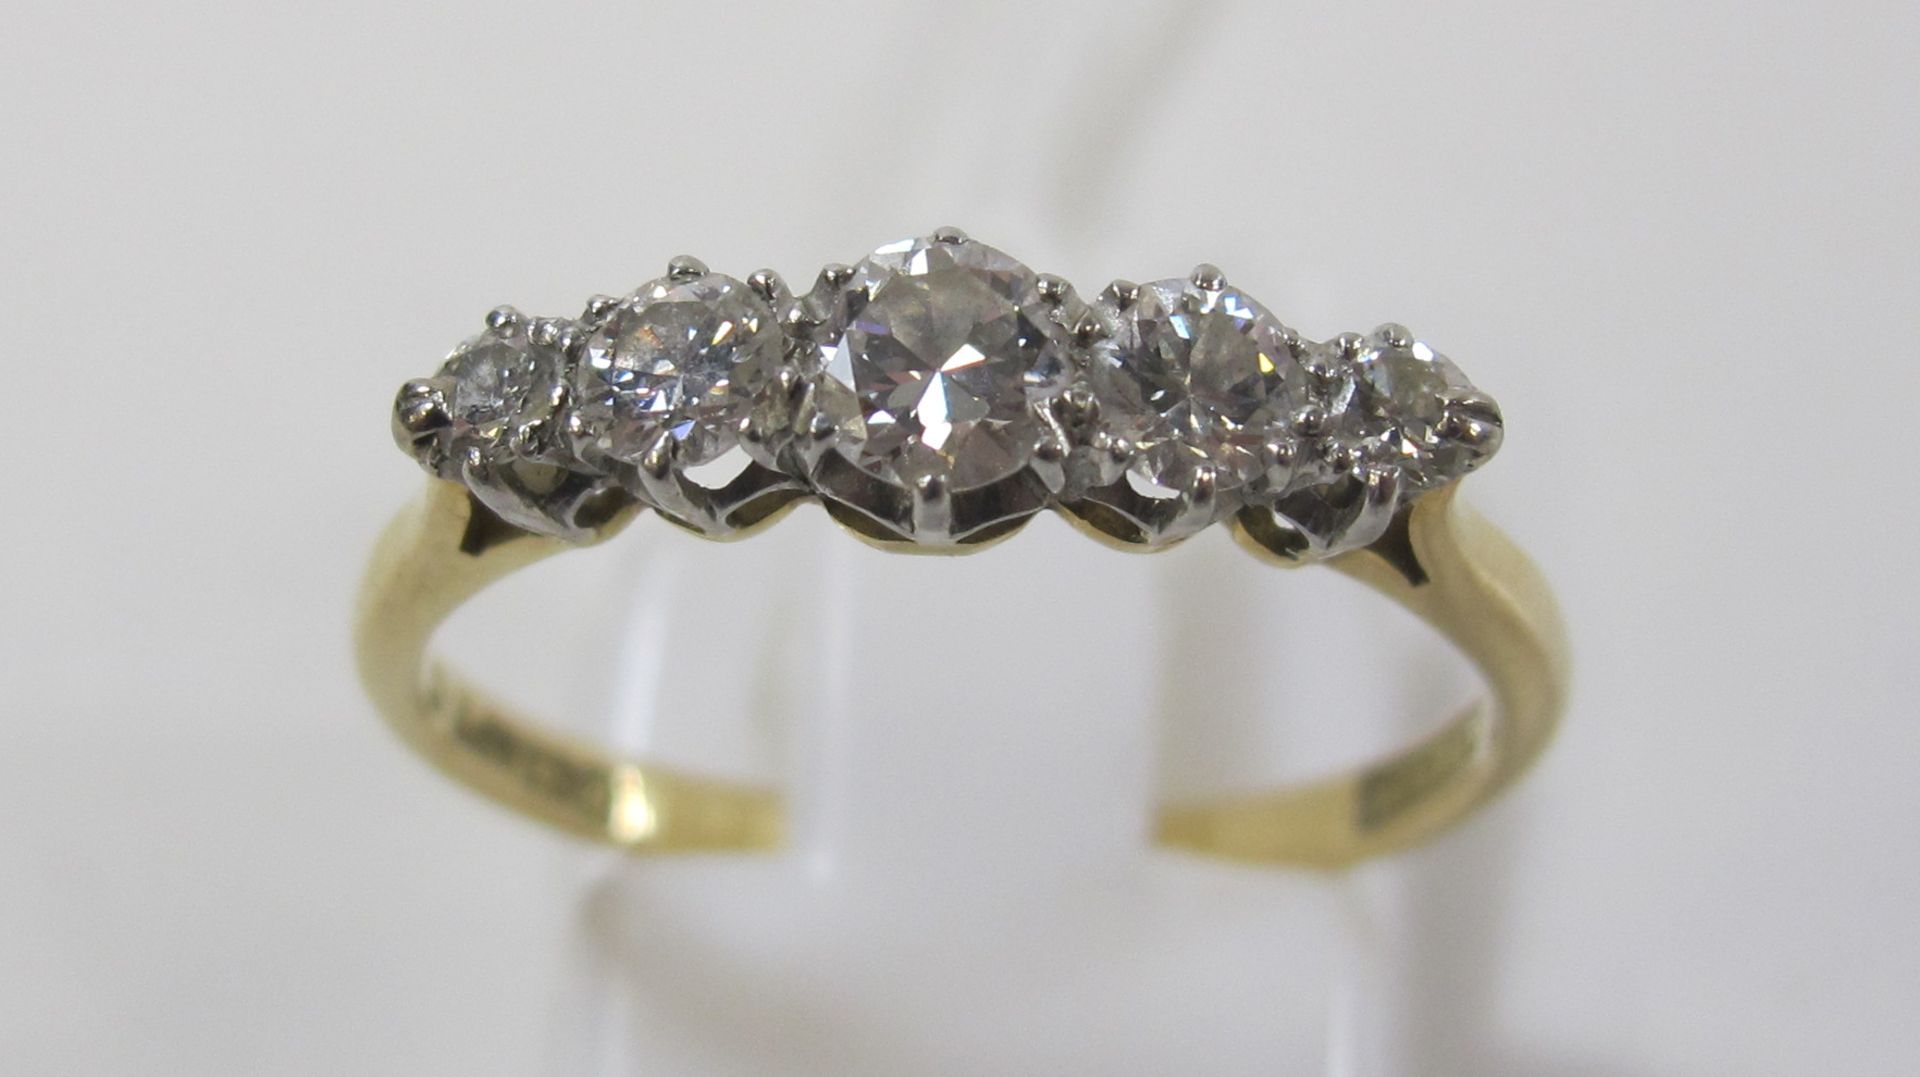 An 18ct gold ring with 50 points diamond. Valuation Certificate £1650 (size P) (est £300-£600) - Image 2 of 3